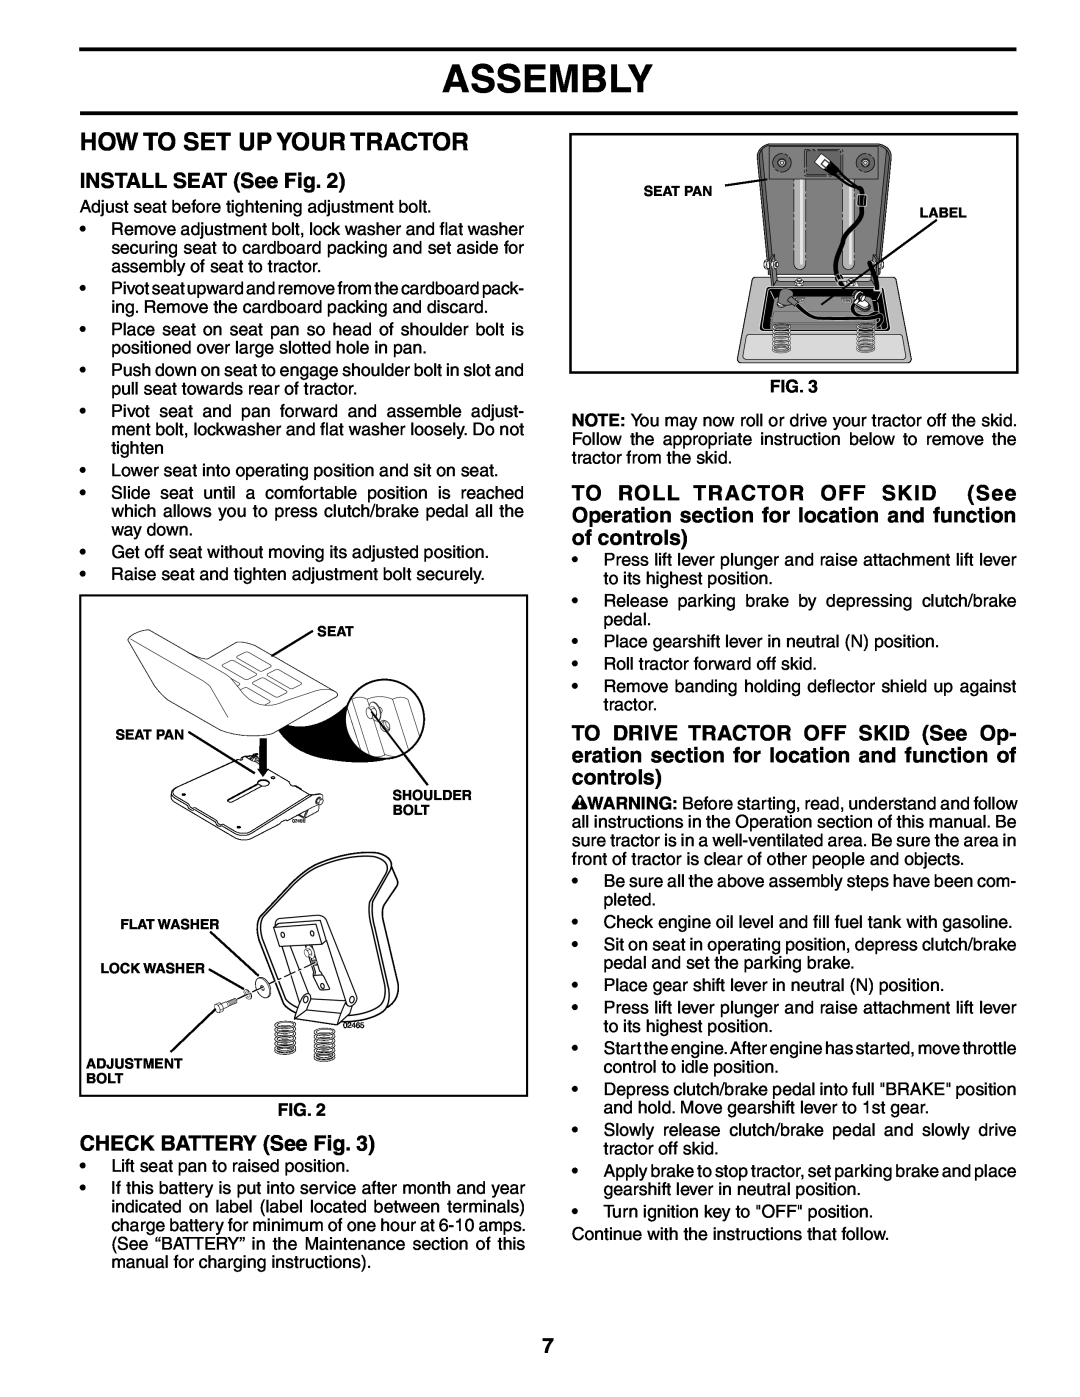 Weed Eater 184404, WE1338A manual How To Set Up Your Tractor, INSTALL SEAT See Fig, CHECK BATTERY See Fig, Assembly 